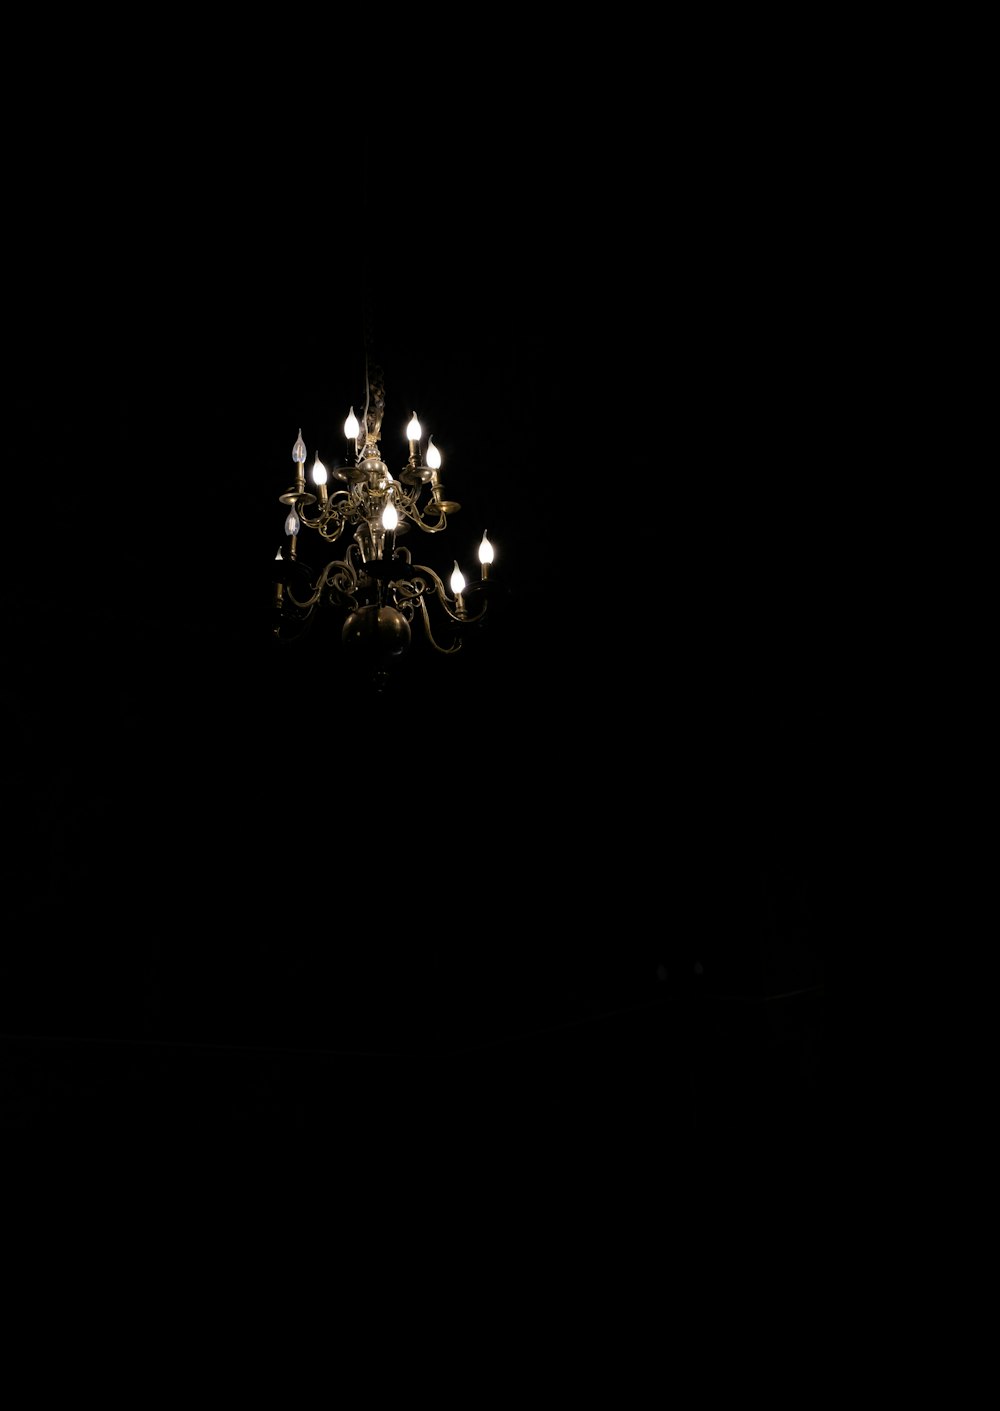 a chandelier hanging from the ceiling in a dark room